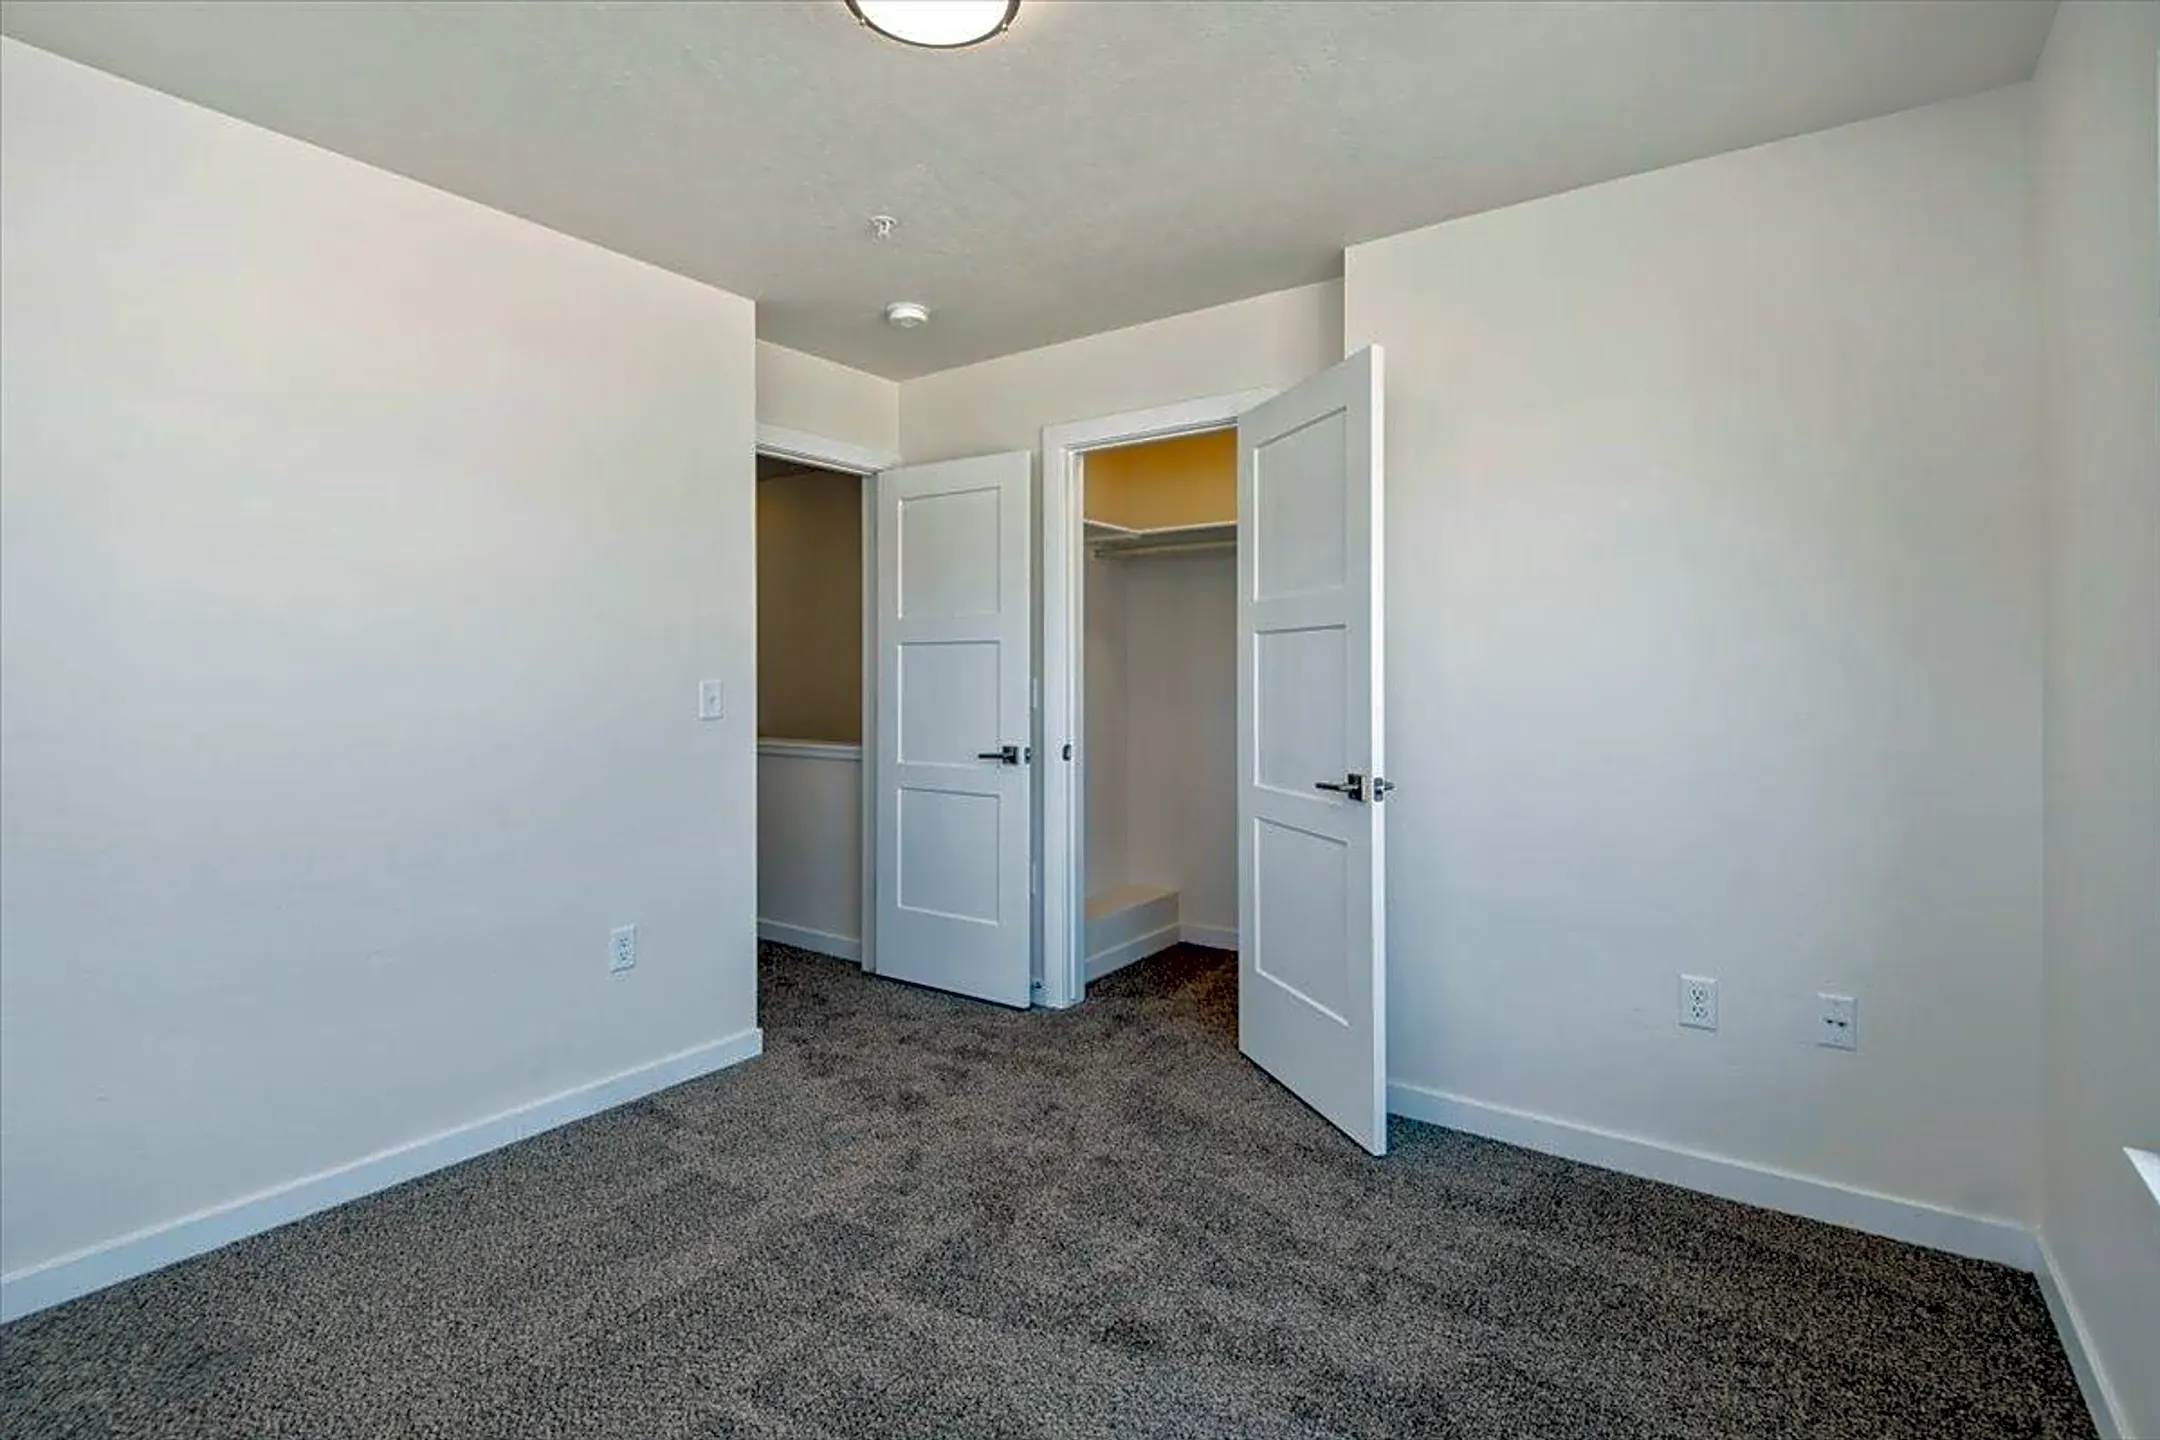 Bedroom - Townhomes At The Silo - Boise, ID